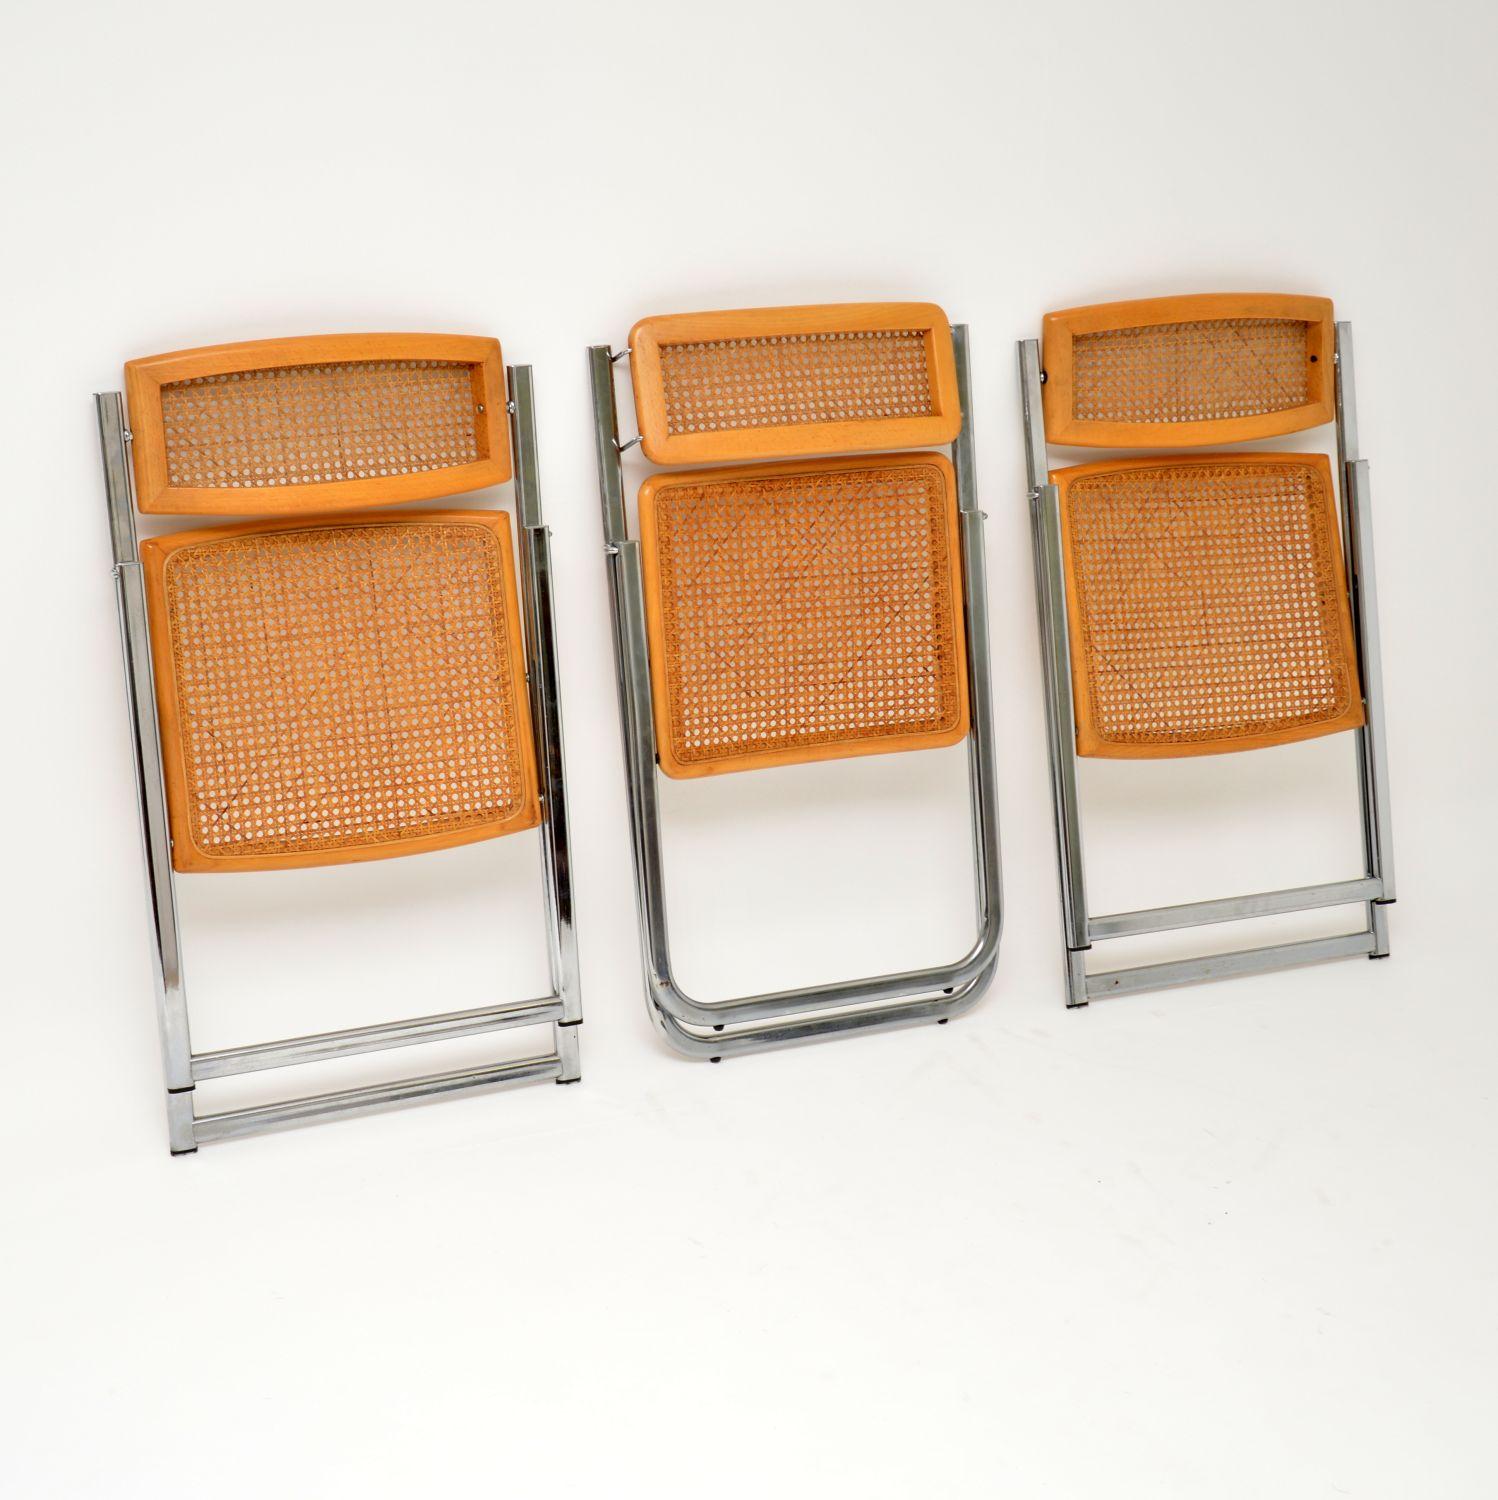 A beautifully designed set of three vintage folding chairs, these were made in Italy by Arben in the 1970-1980s. The quality is excellent and they are in superb condition, with barely any wear to be seen; the cane has no damage anywhere. Two of the